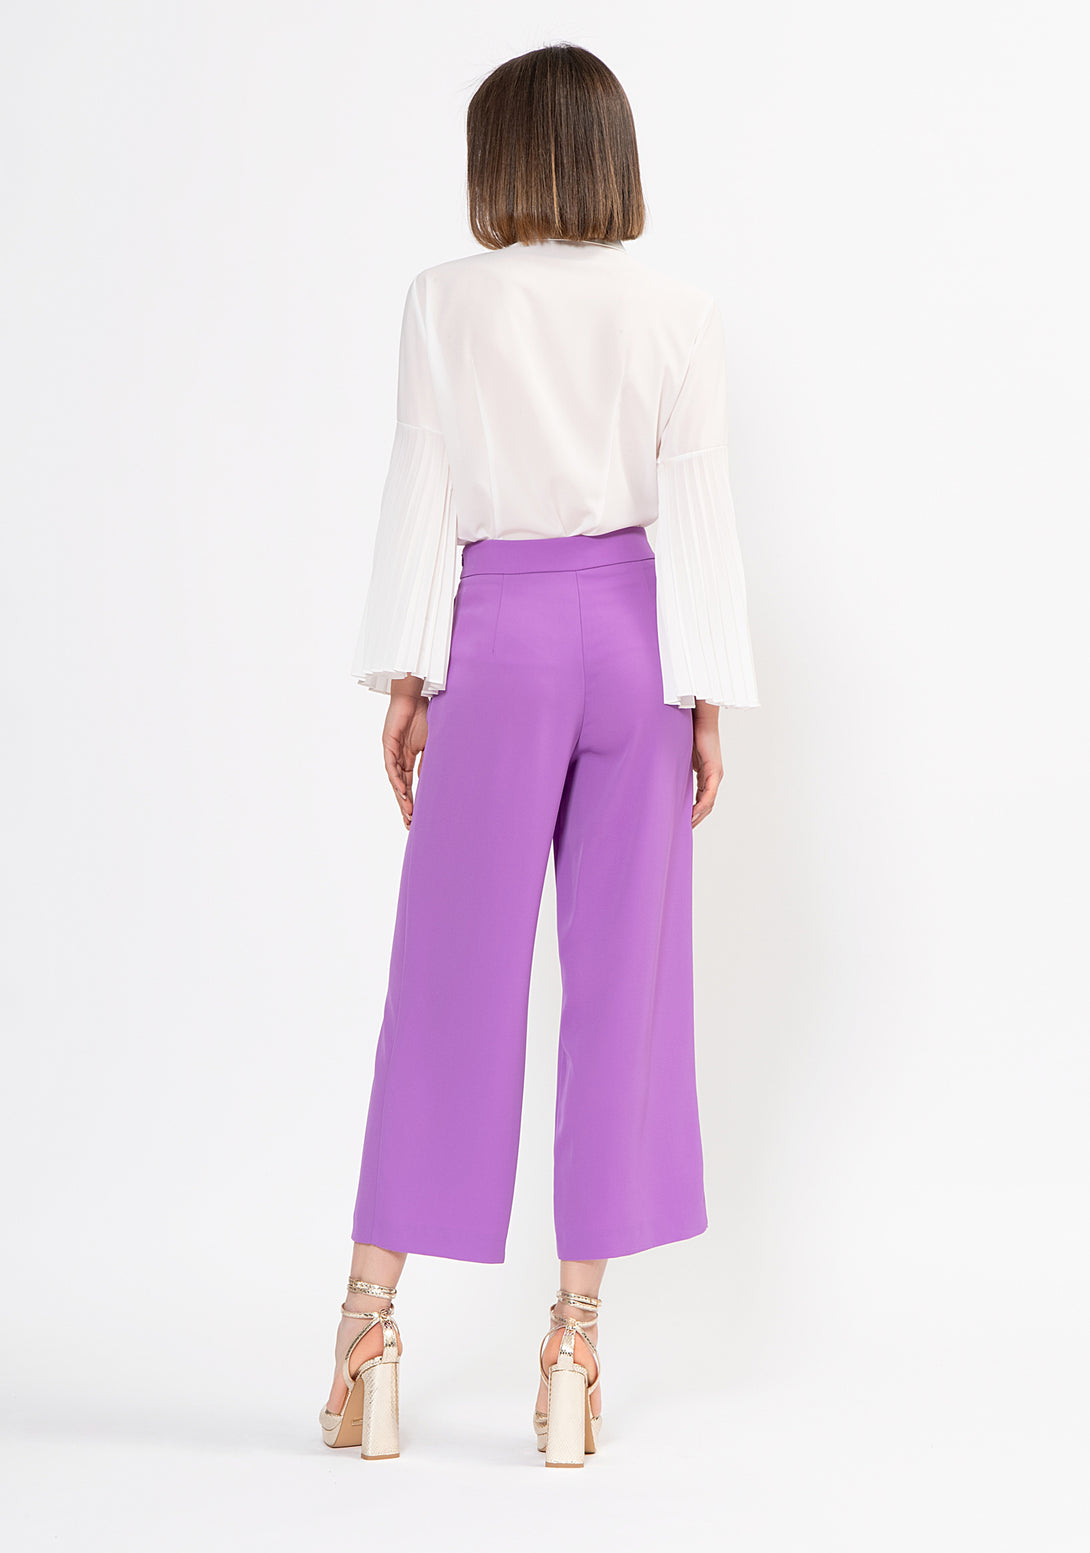 Culotte pants flare made in crèpe